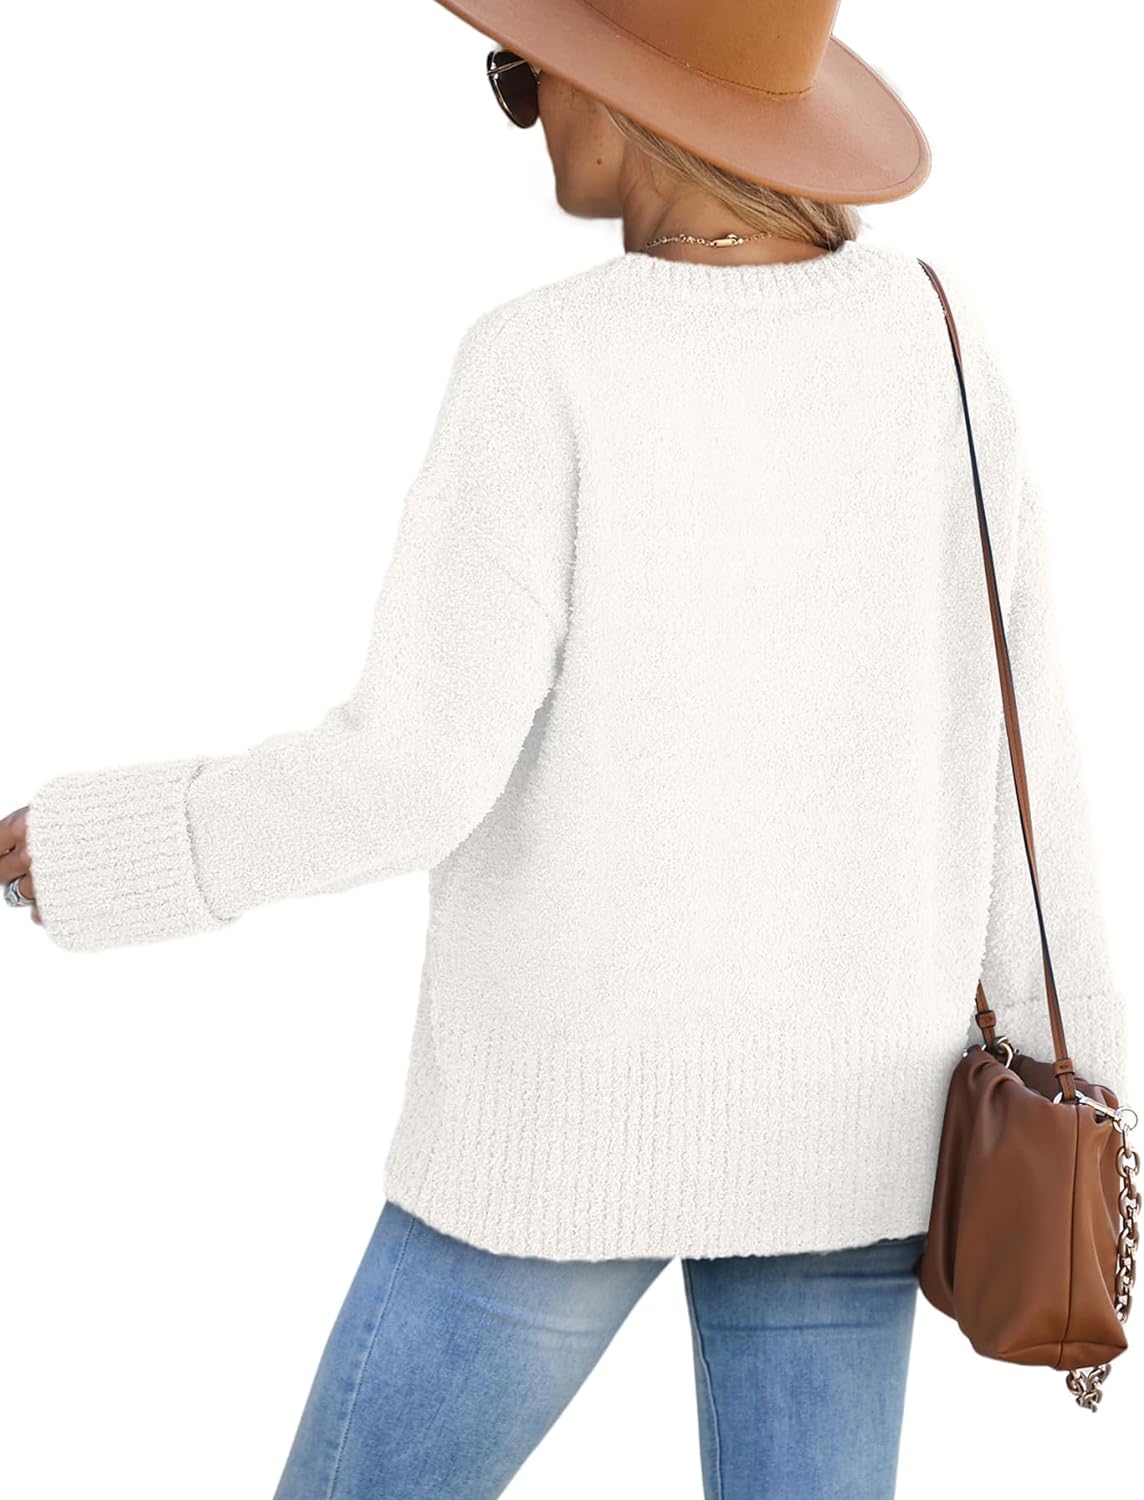 Stay Warm and Stylish with XIEERDUO Plus Size Sweaters for Women